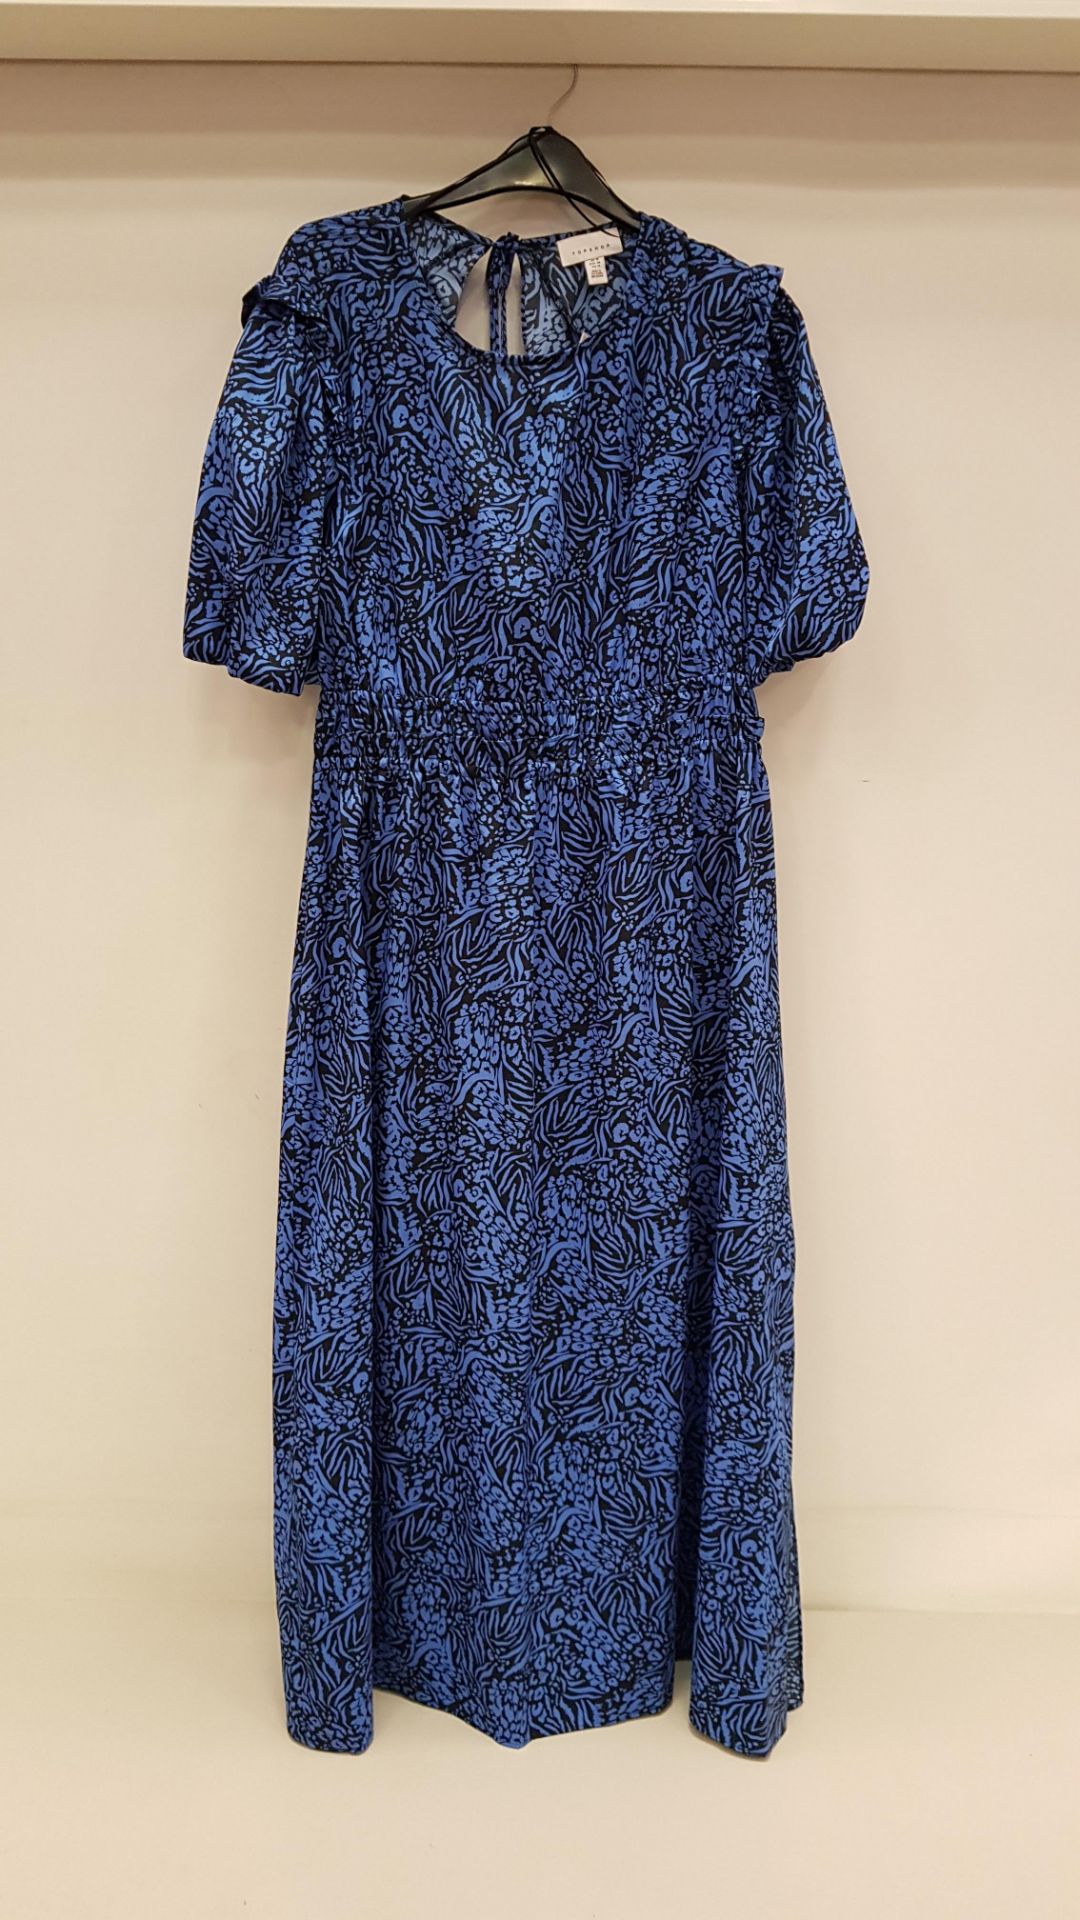 20 X BRAND NEW DOROTHY PERKINS BLUE AND BLACK DRESSES IN VARIOUS SIZES RRP £45.00 (TOTAL RRP £900.